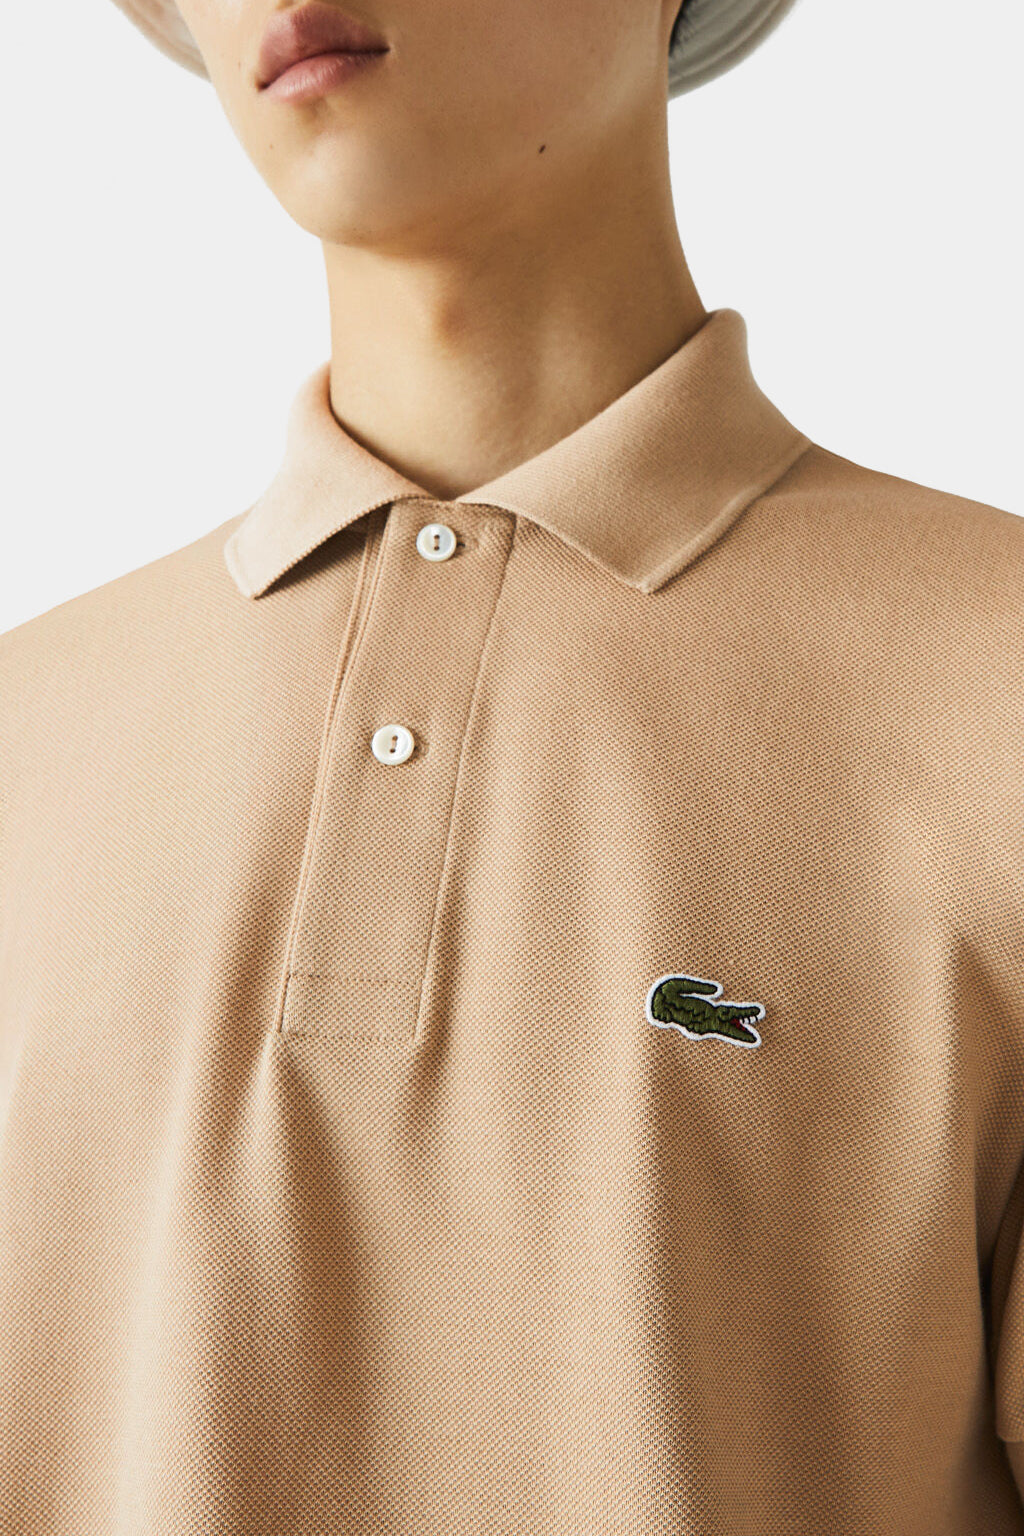 Lacoste - Classic Fit L.12.12 Polo Shirt